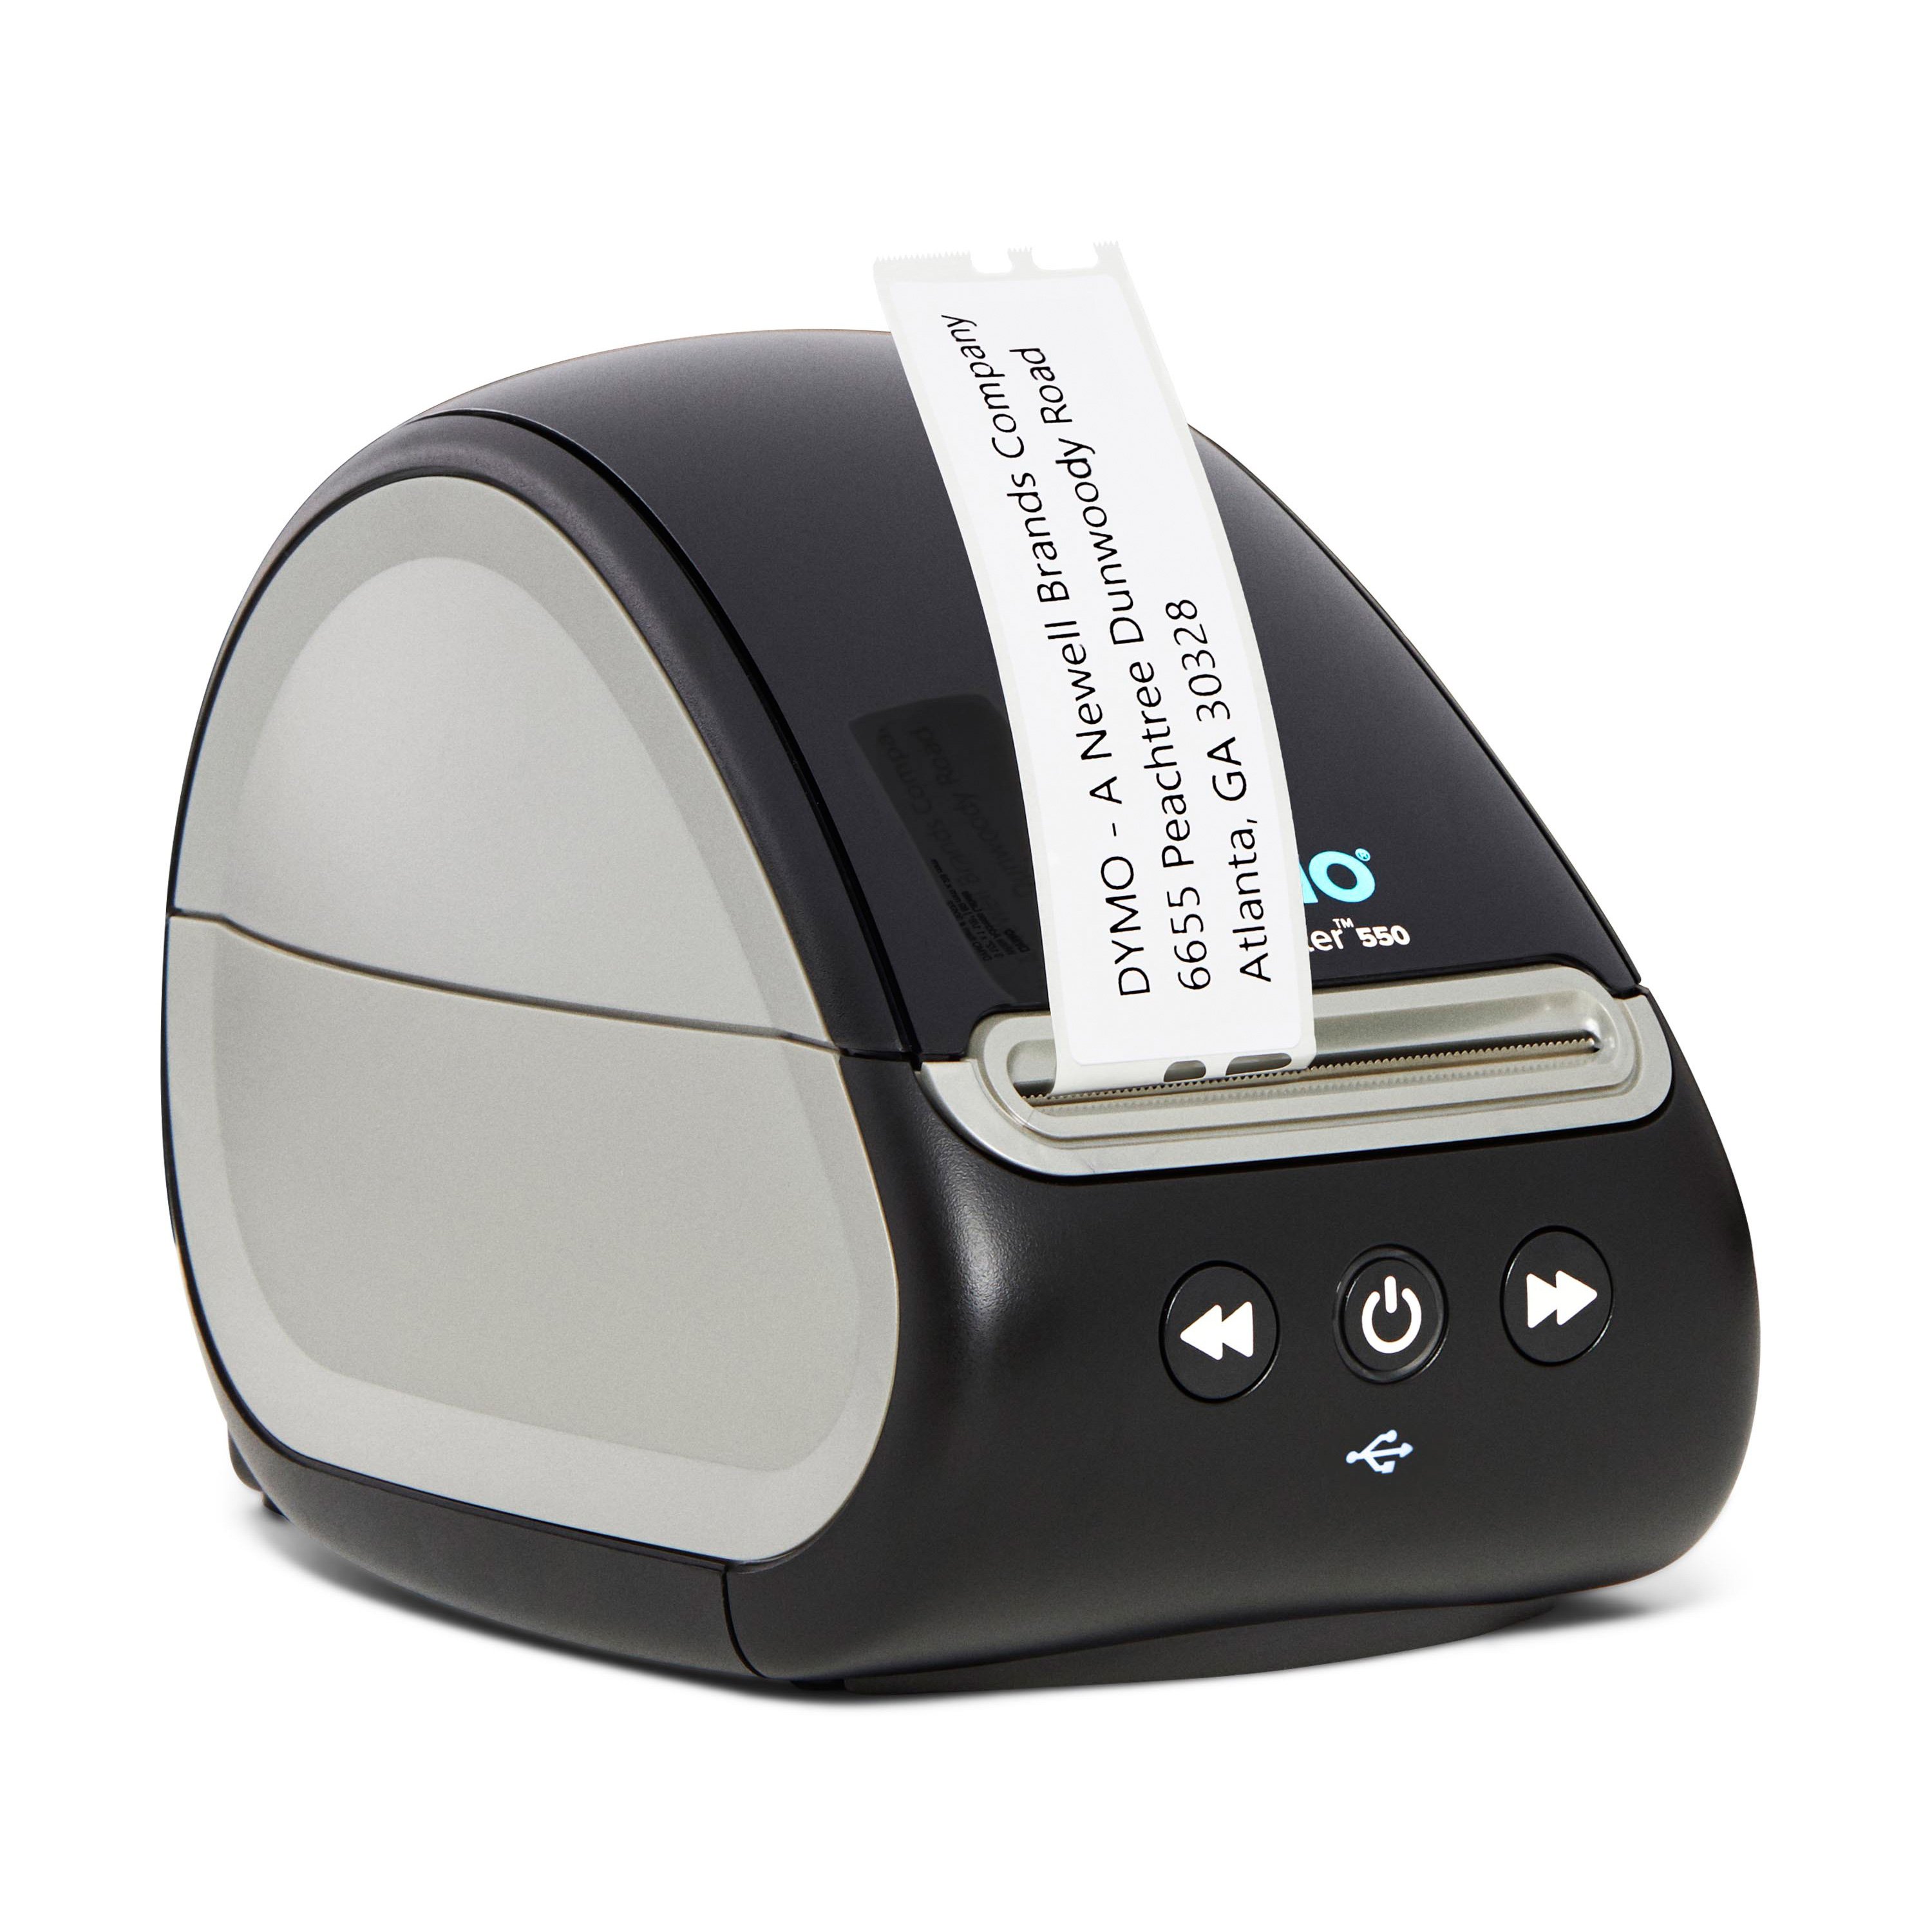 Brand New DYMO Jewelry Price Tag Printer Includes Barbell Labels